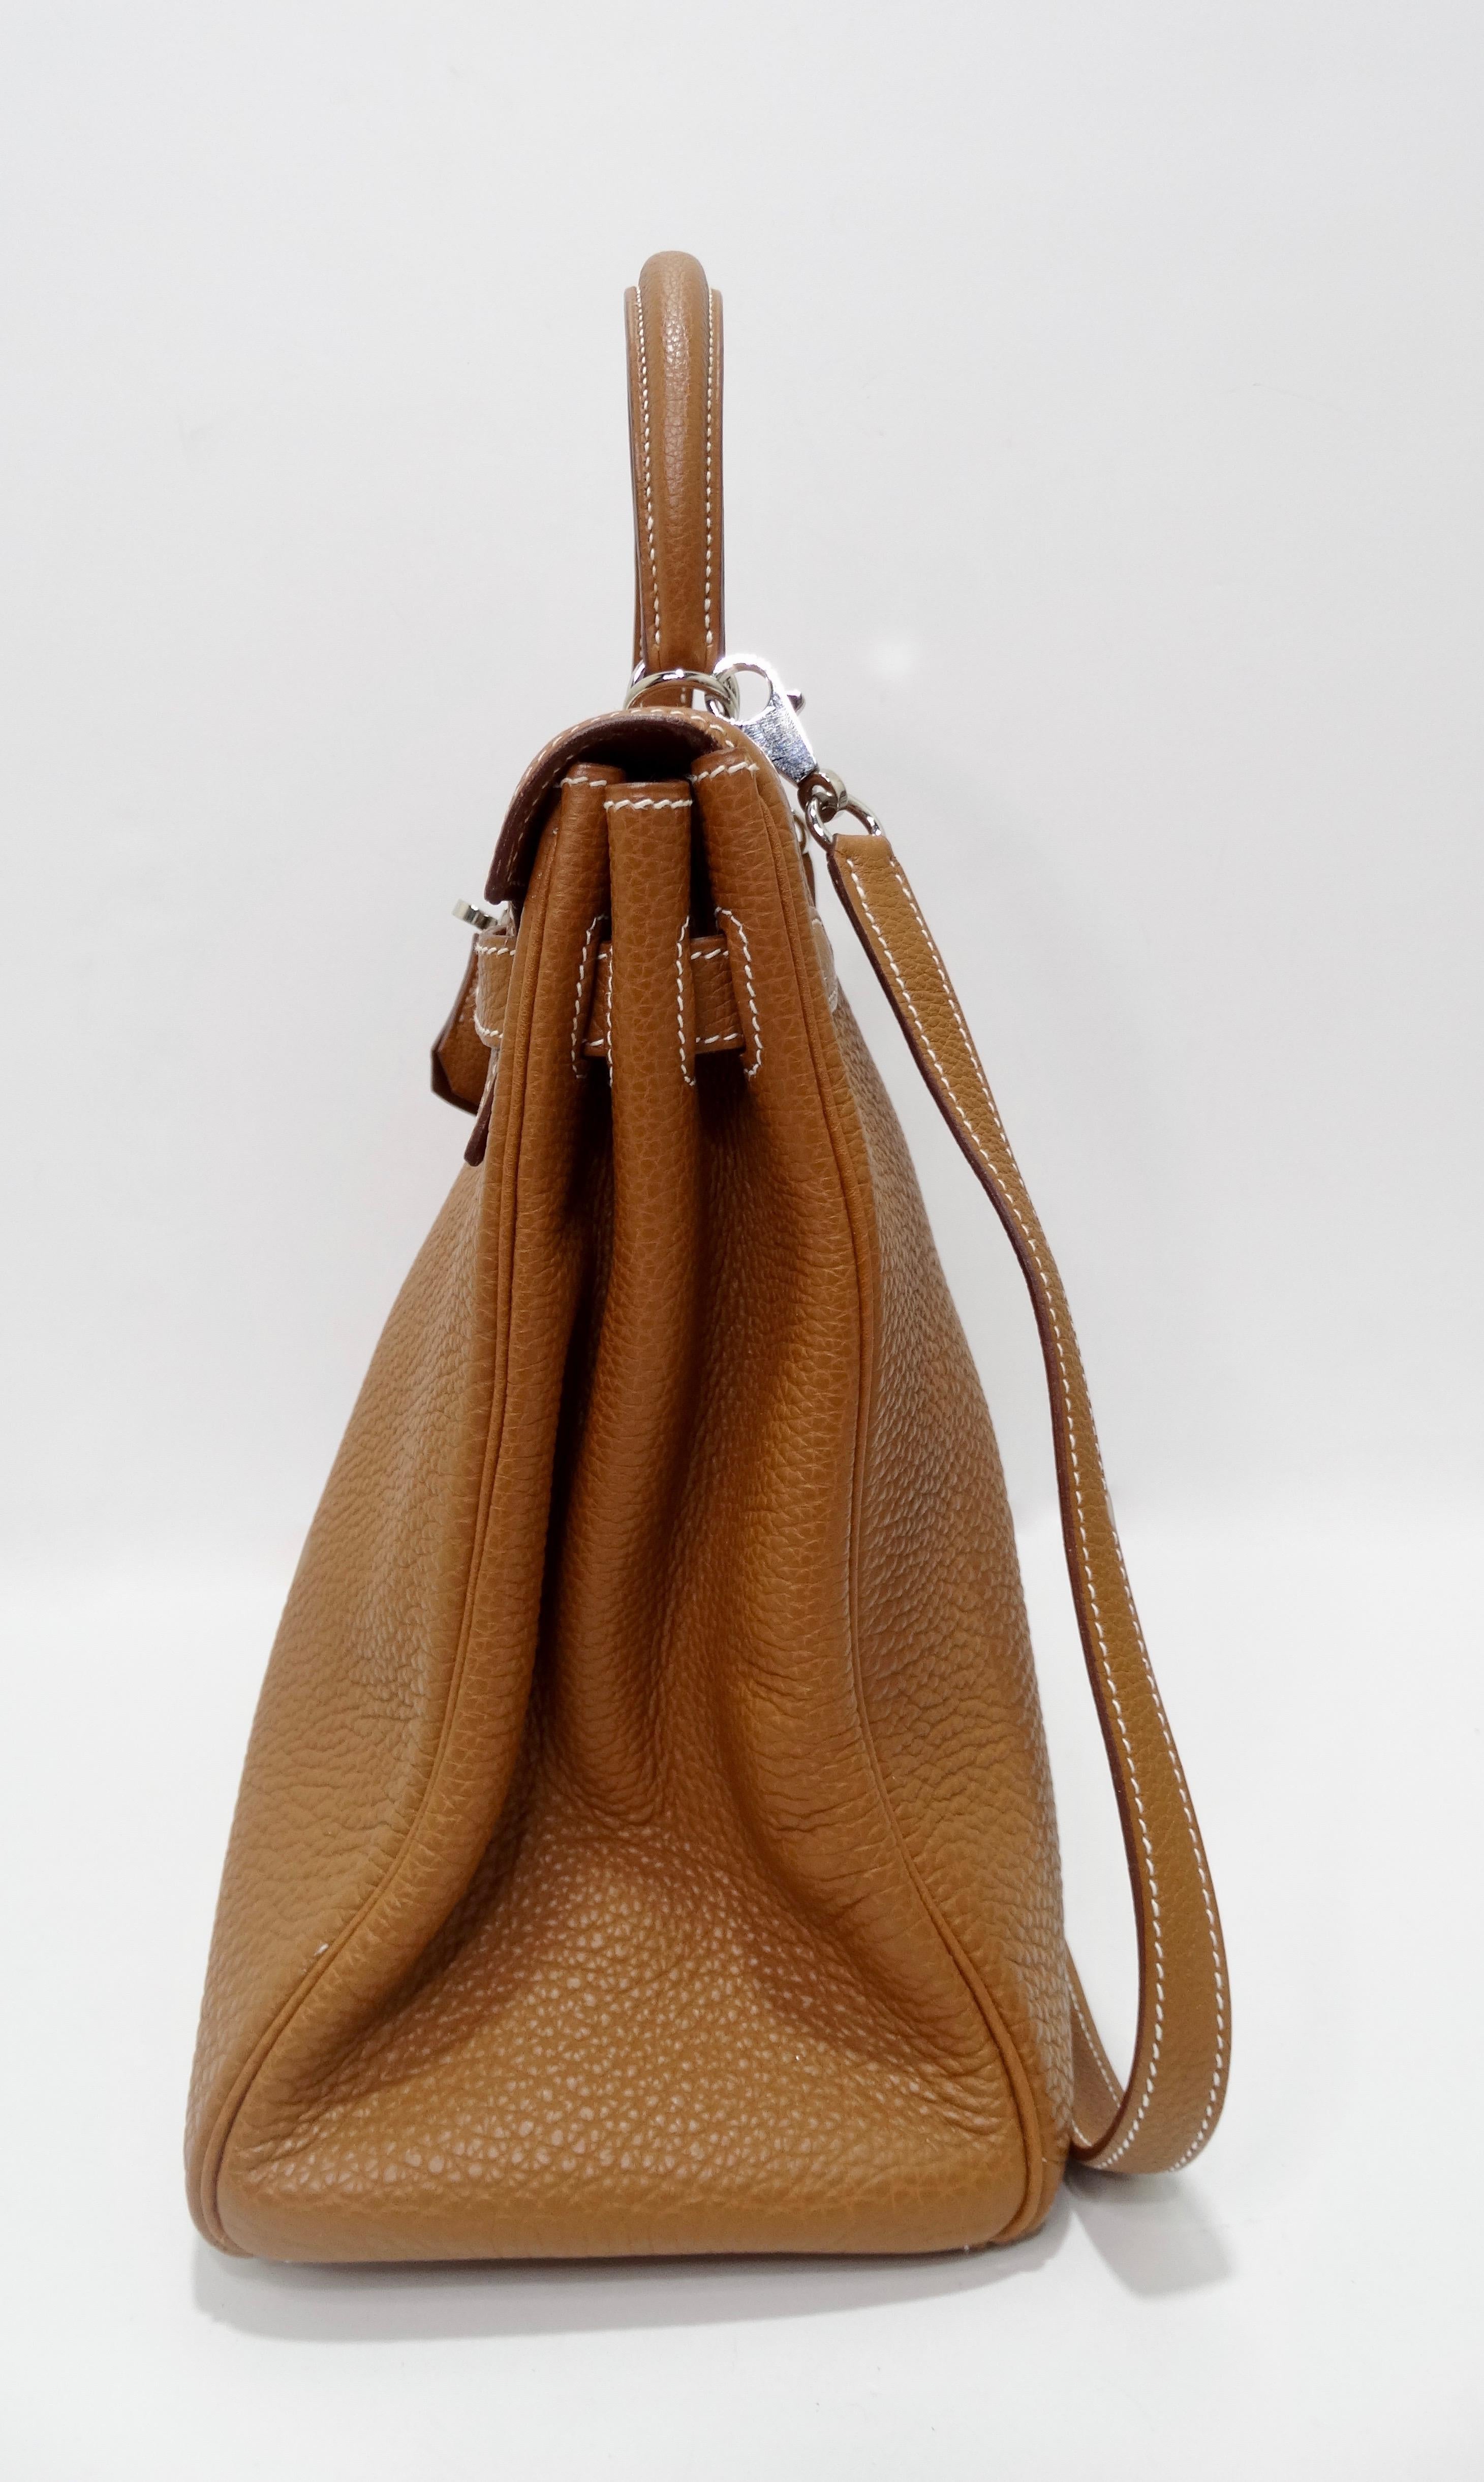 Hello Hermés! Handcrafted by the artisans of Hermes into an iconic 35cm Kelly from 2005. This Hermes Kelly handbag is crafted from togo leather in a beautiful shade of golden brown with Palladium hardware. Features white stitching, single rolled top